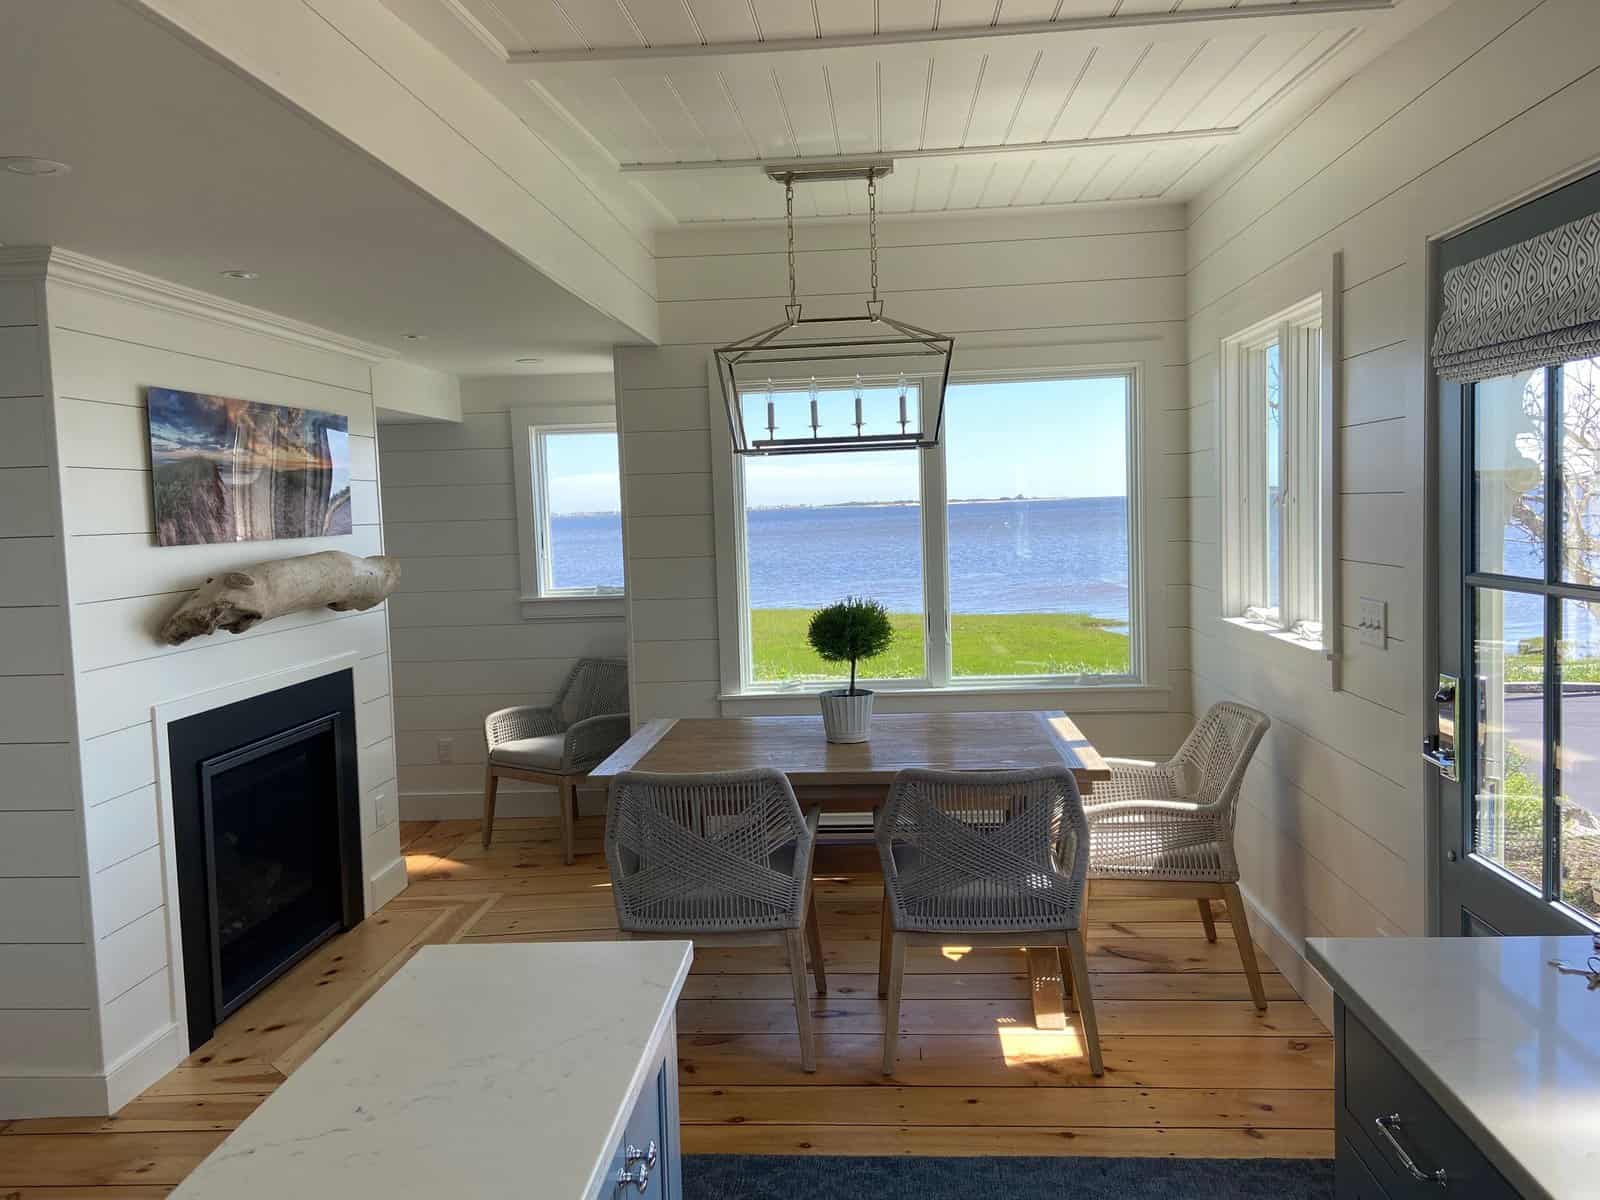 View from Kitchen to Dining Area-A visual connection between the first-floor spaces was created by removing walls and using detailed moldings, shiplap wall paneling, and beadboard ceiling paneling throughout.